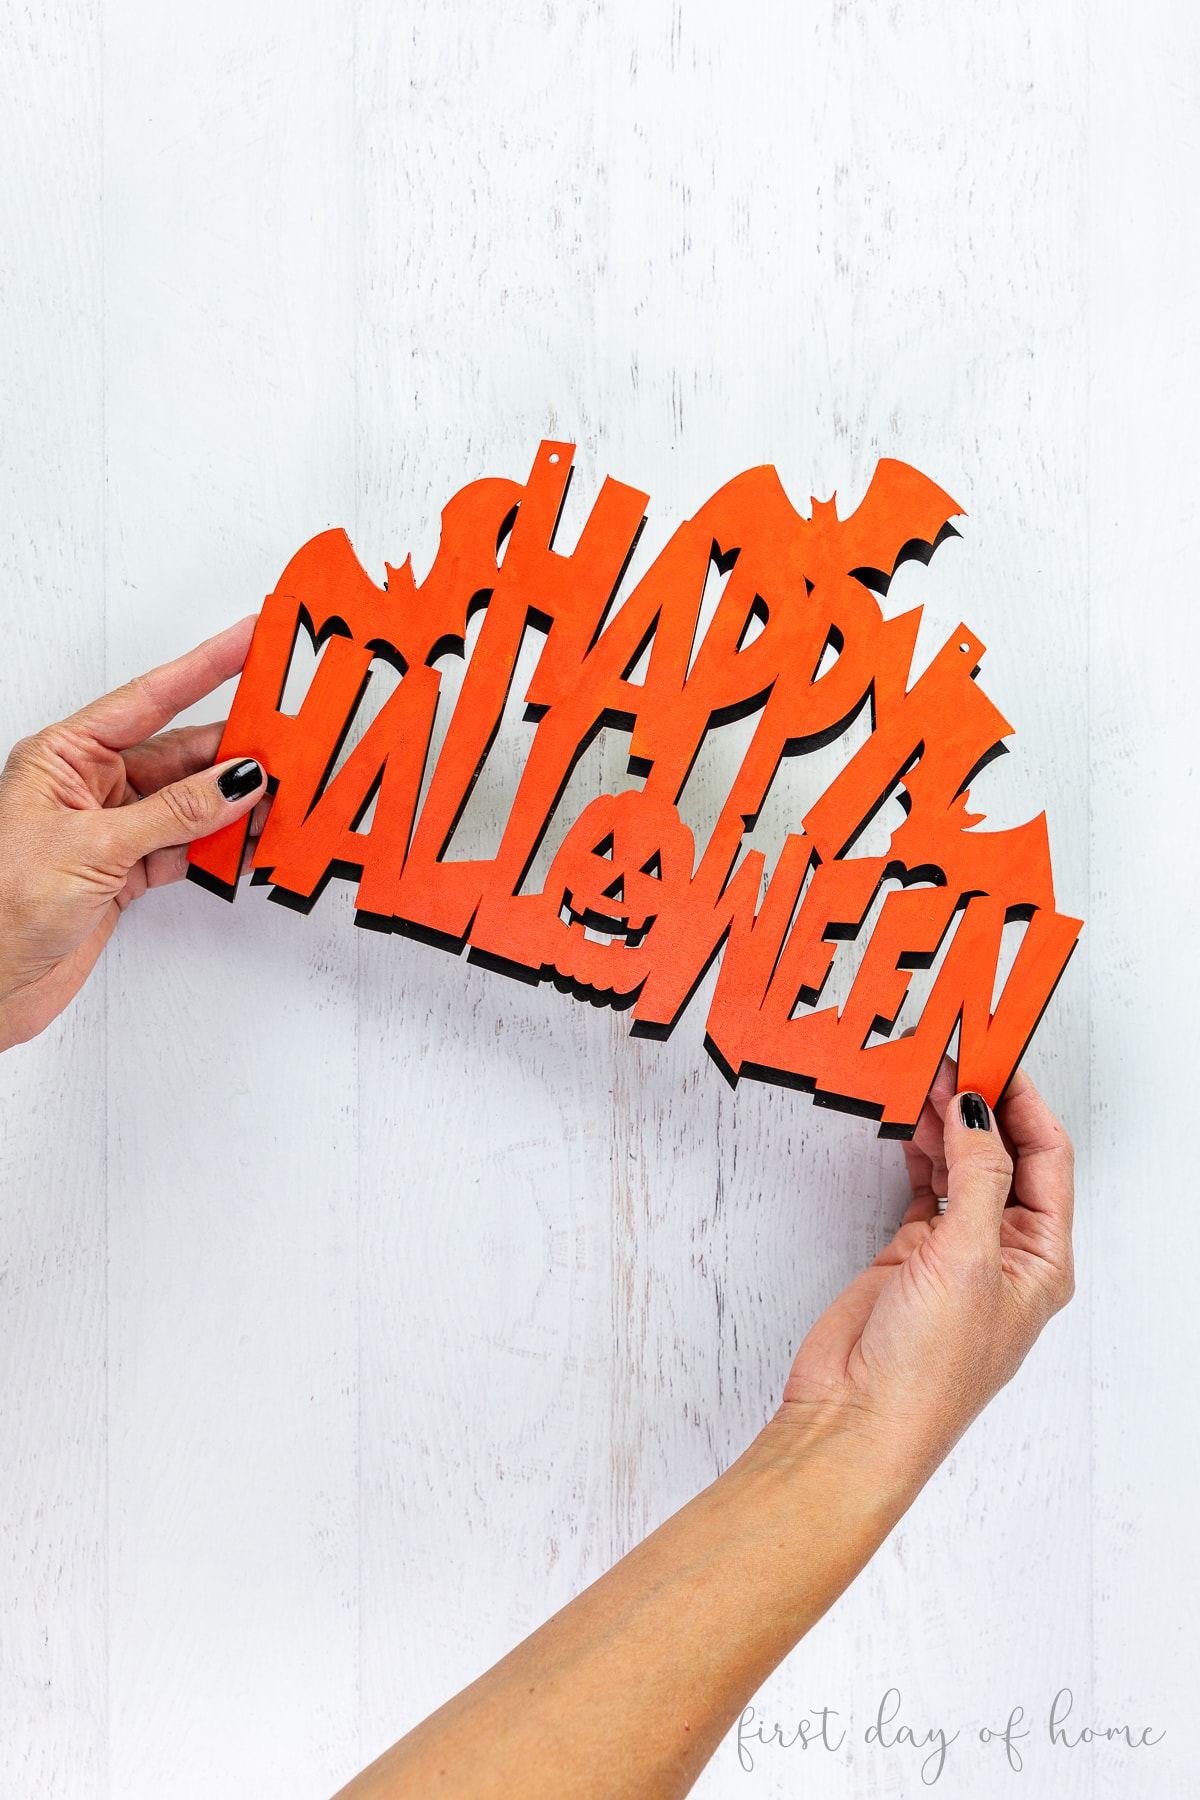 Wooden cutout with phrase "Happy Halloween."